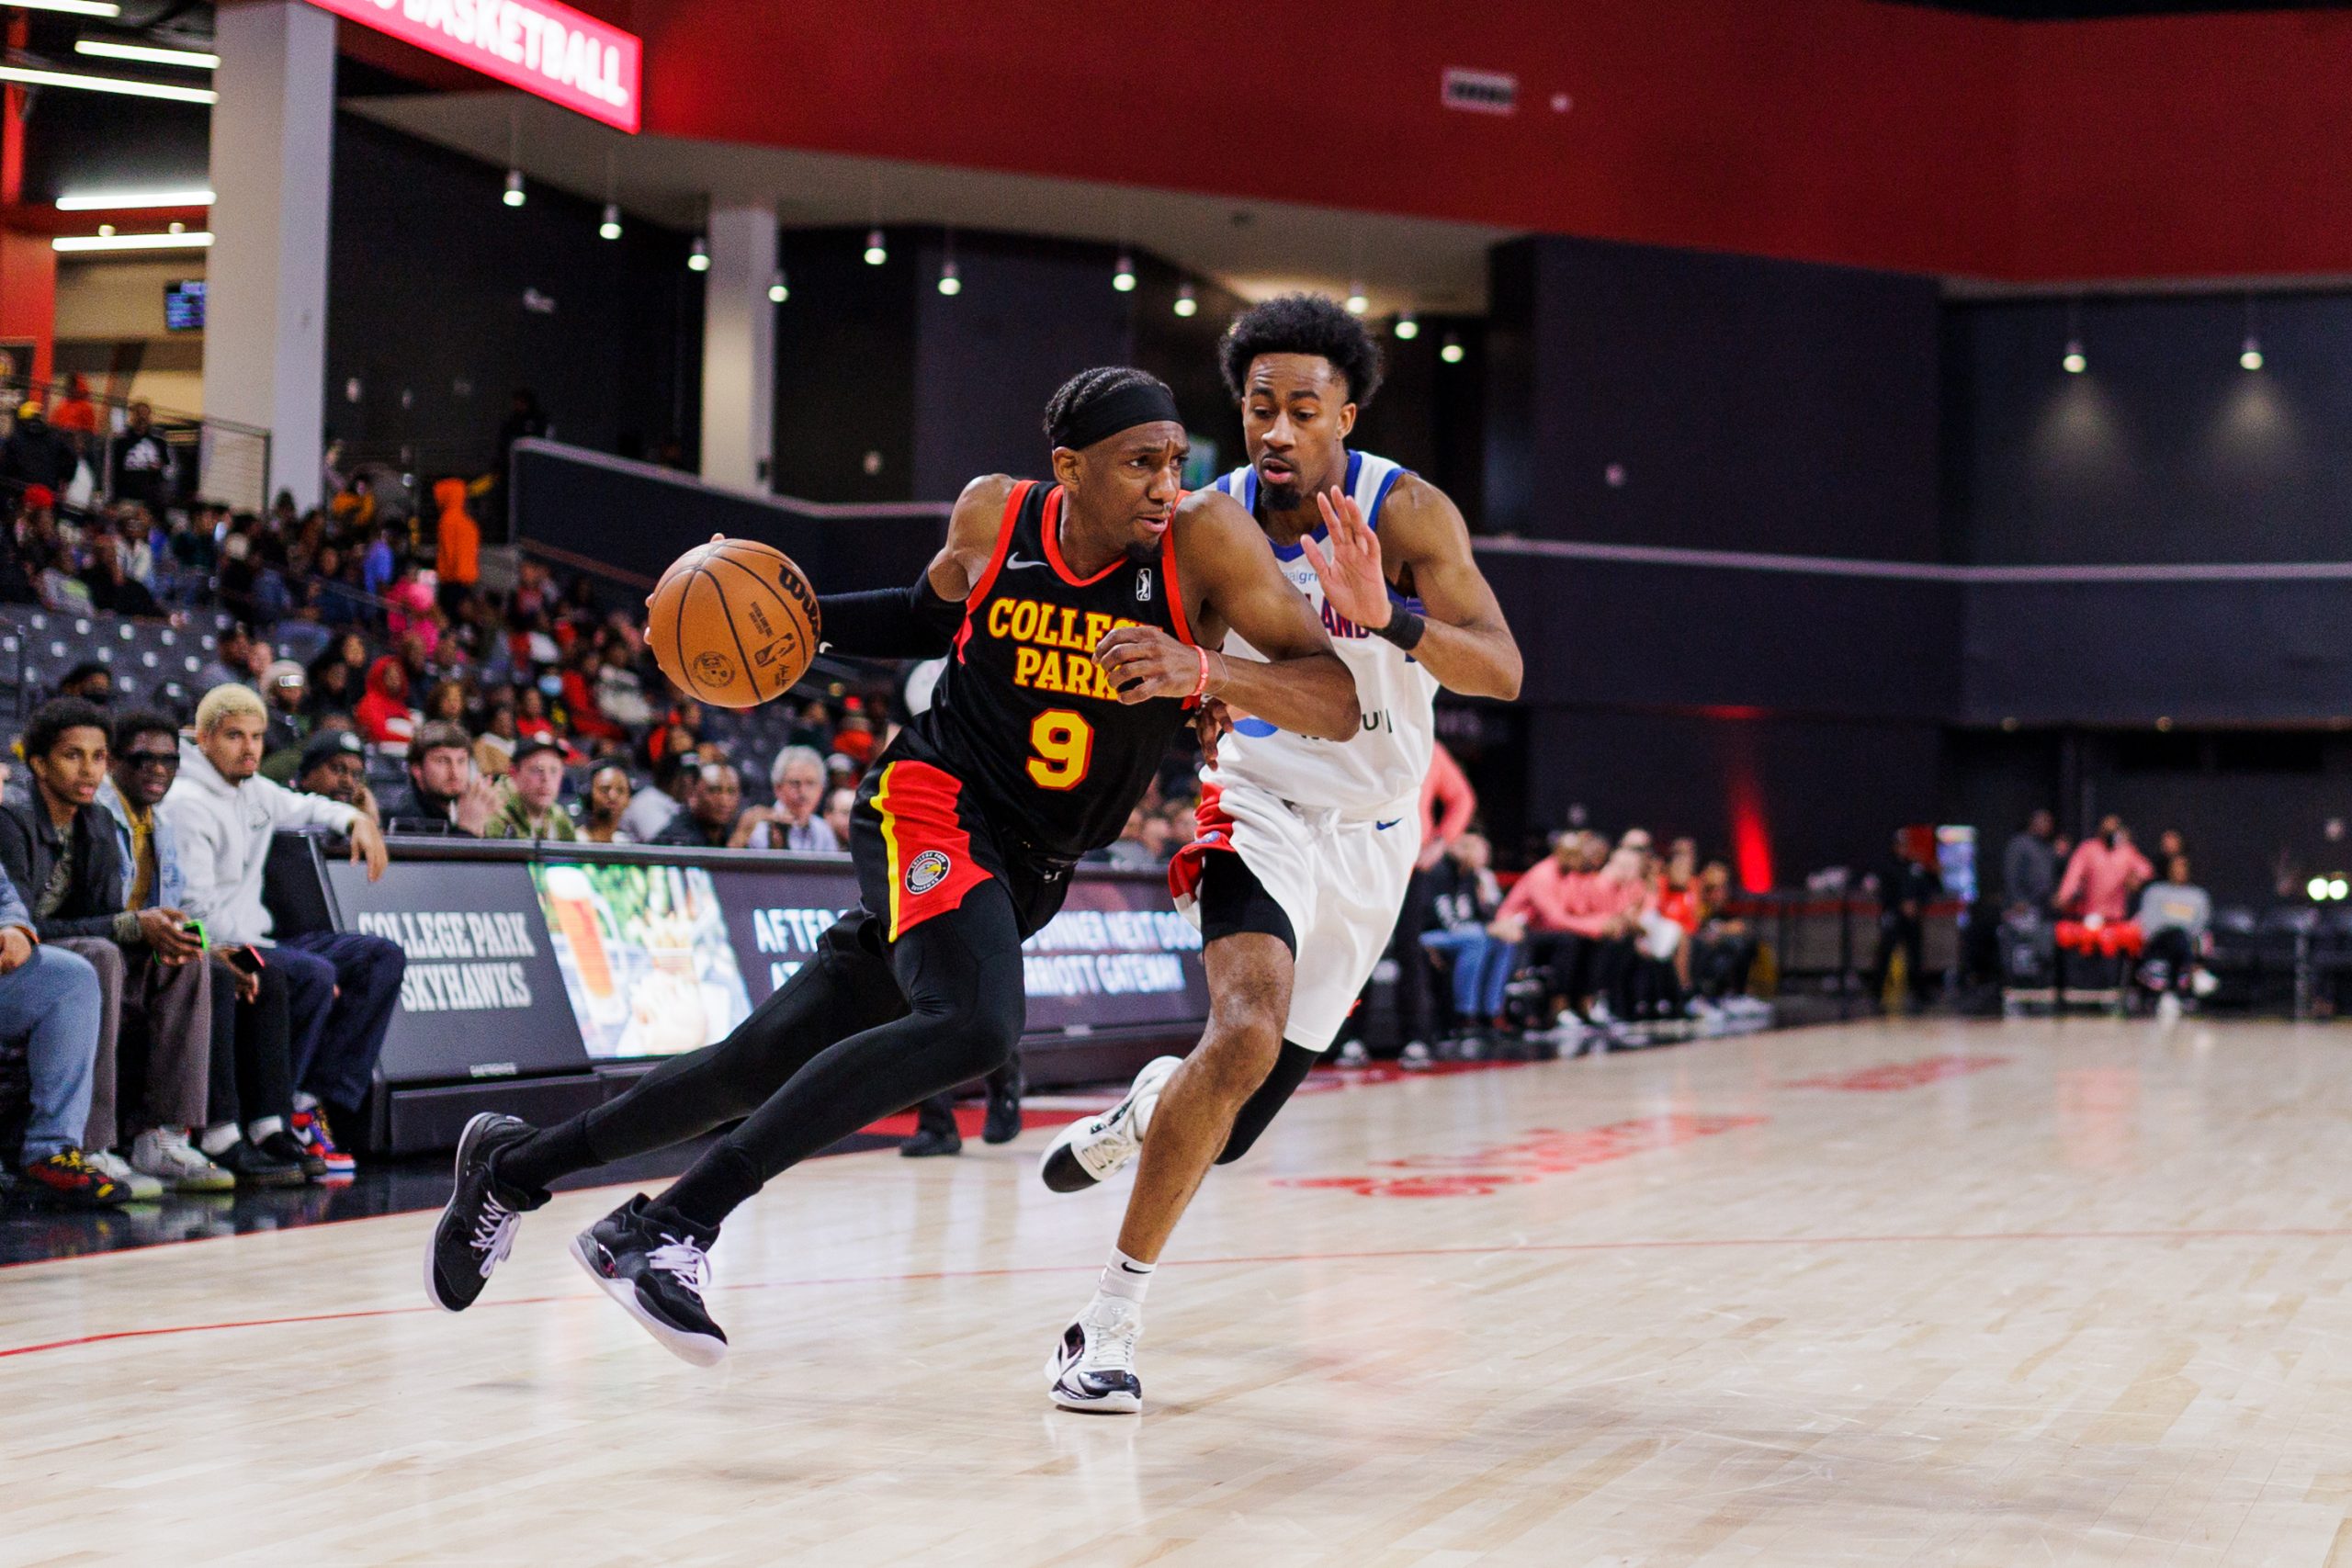 How the Perception of the G League Has Changed Amongst the Players as Being Part of the Process